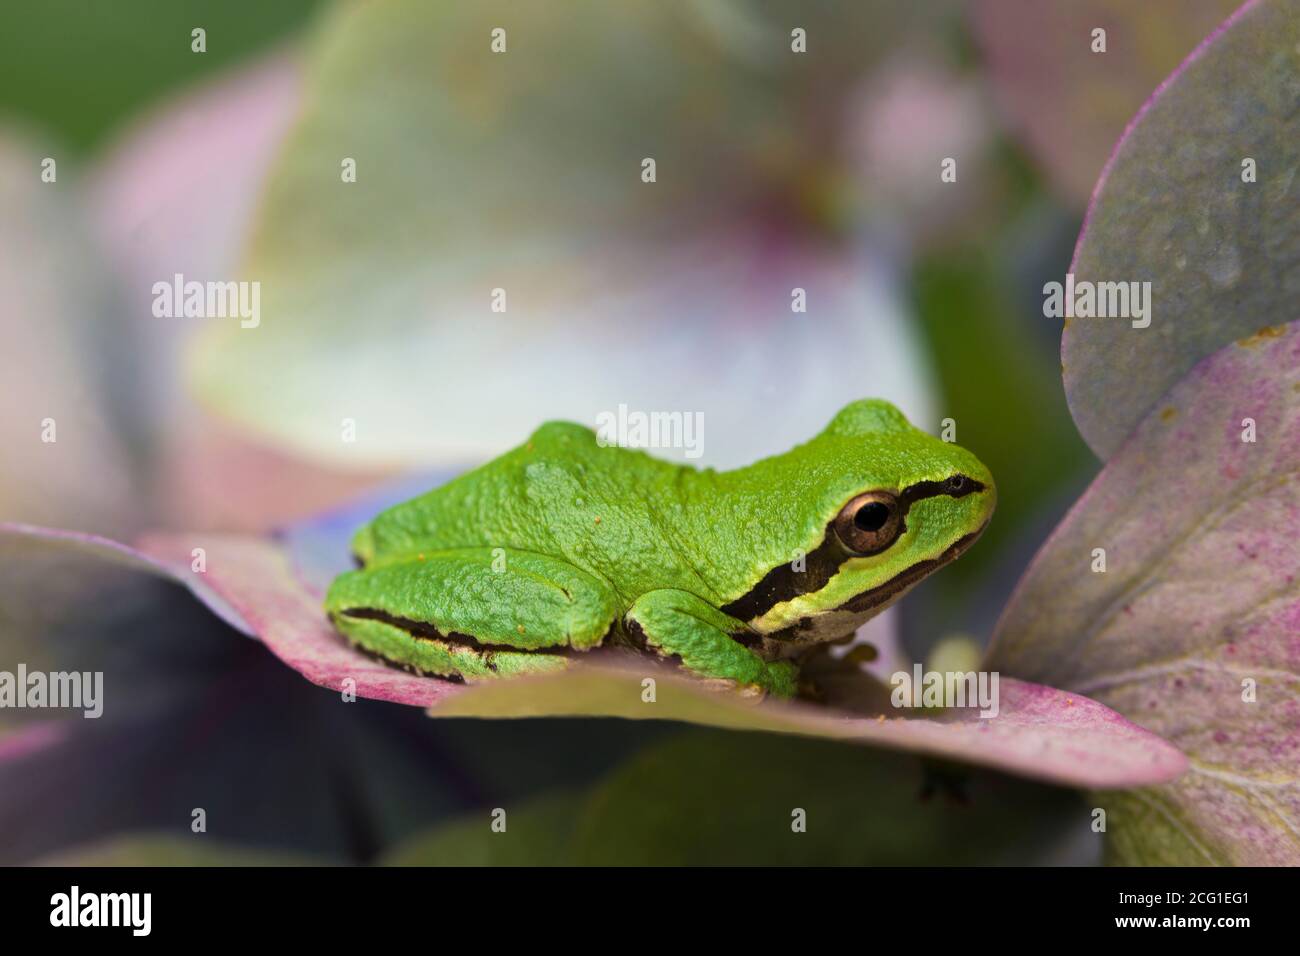 A pacific tree frog rests on the petals of a hydrangrea Stock Photo